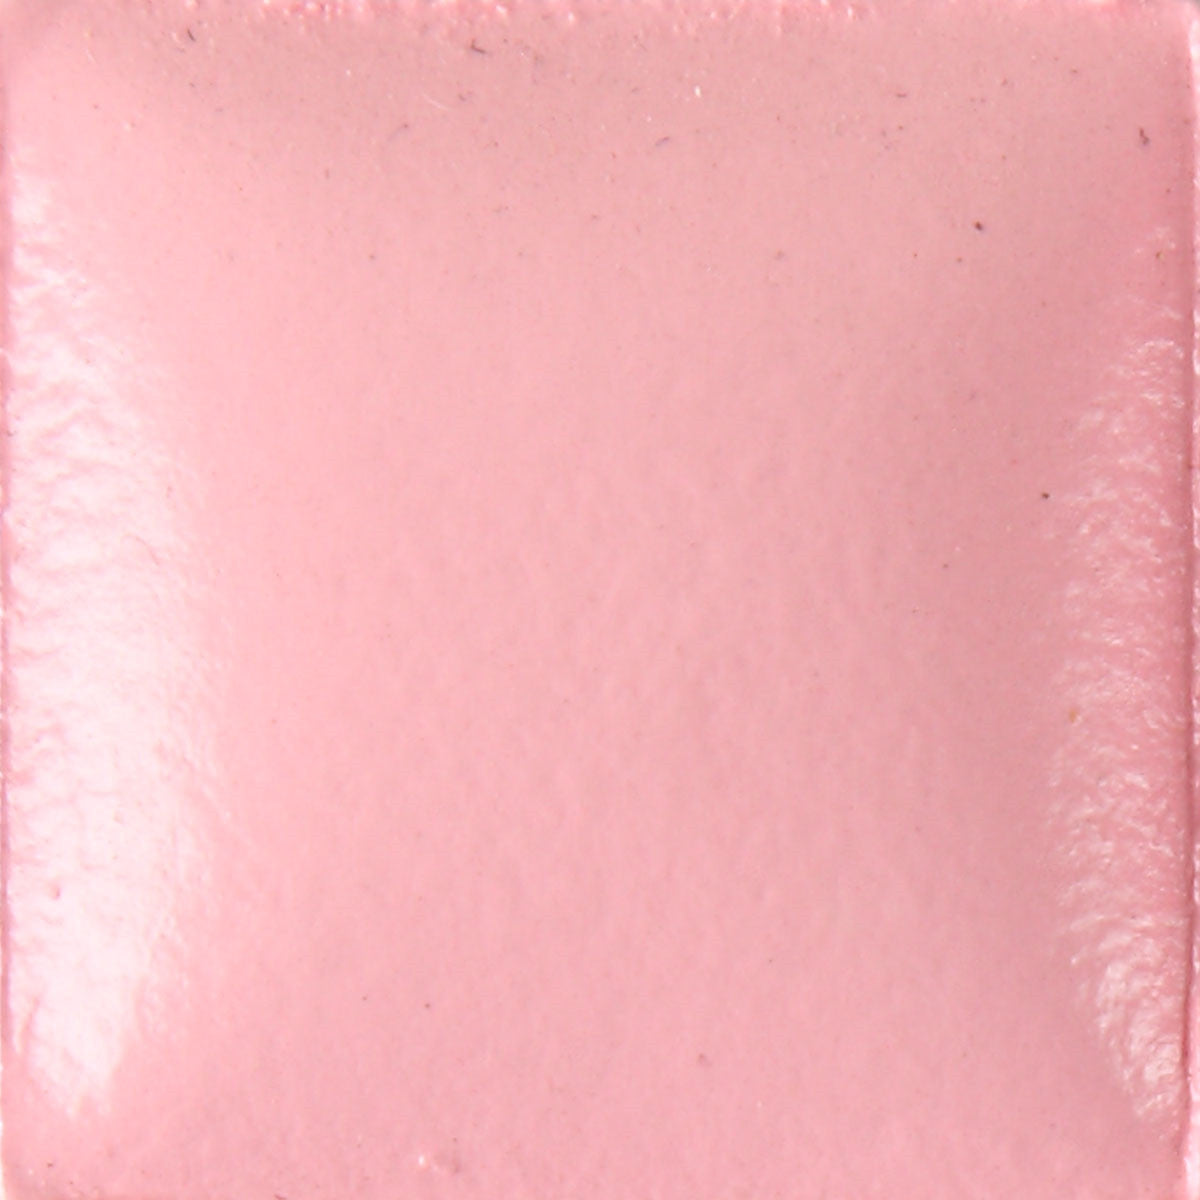 Duncan OS444 Light Pink Opaque Bisq-Stain, 2 oz